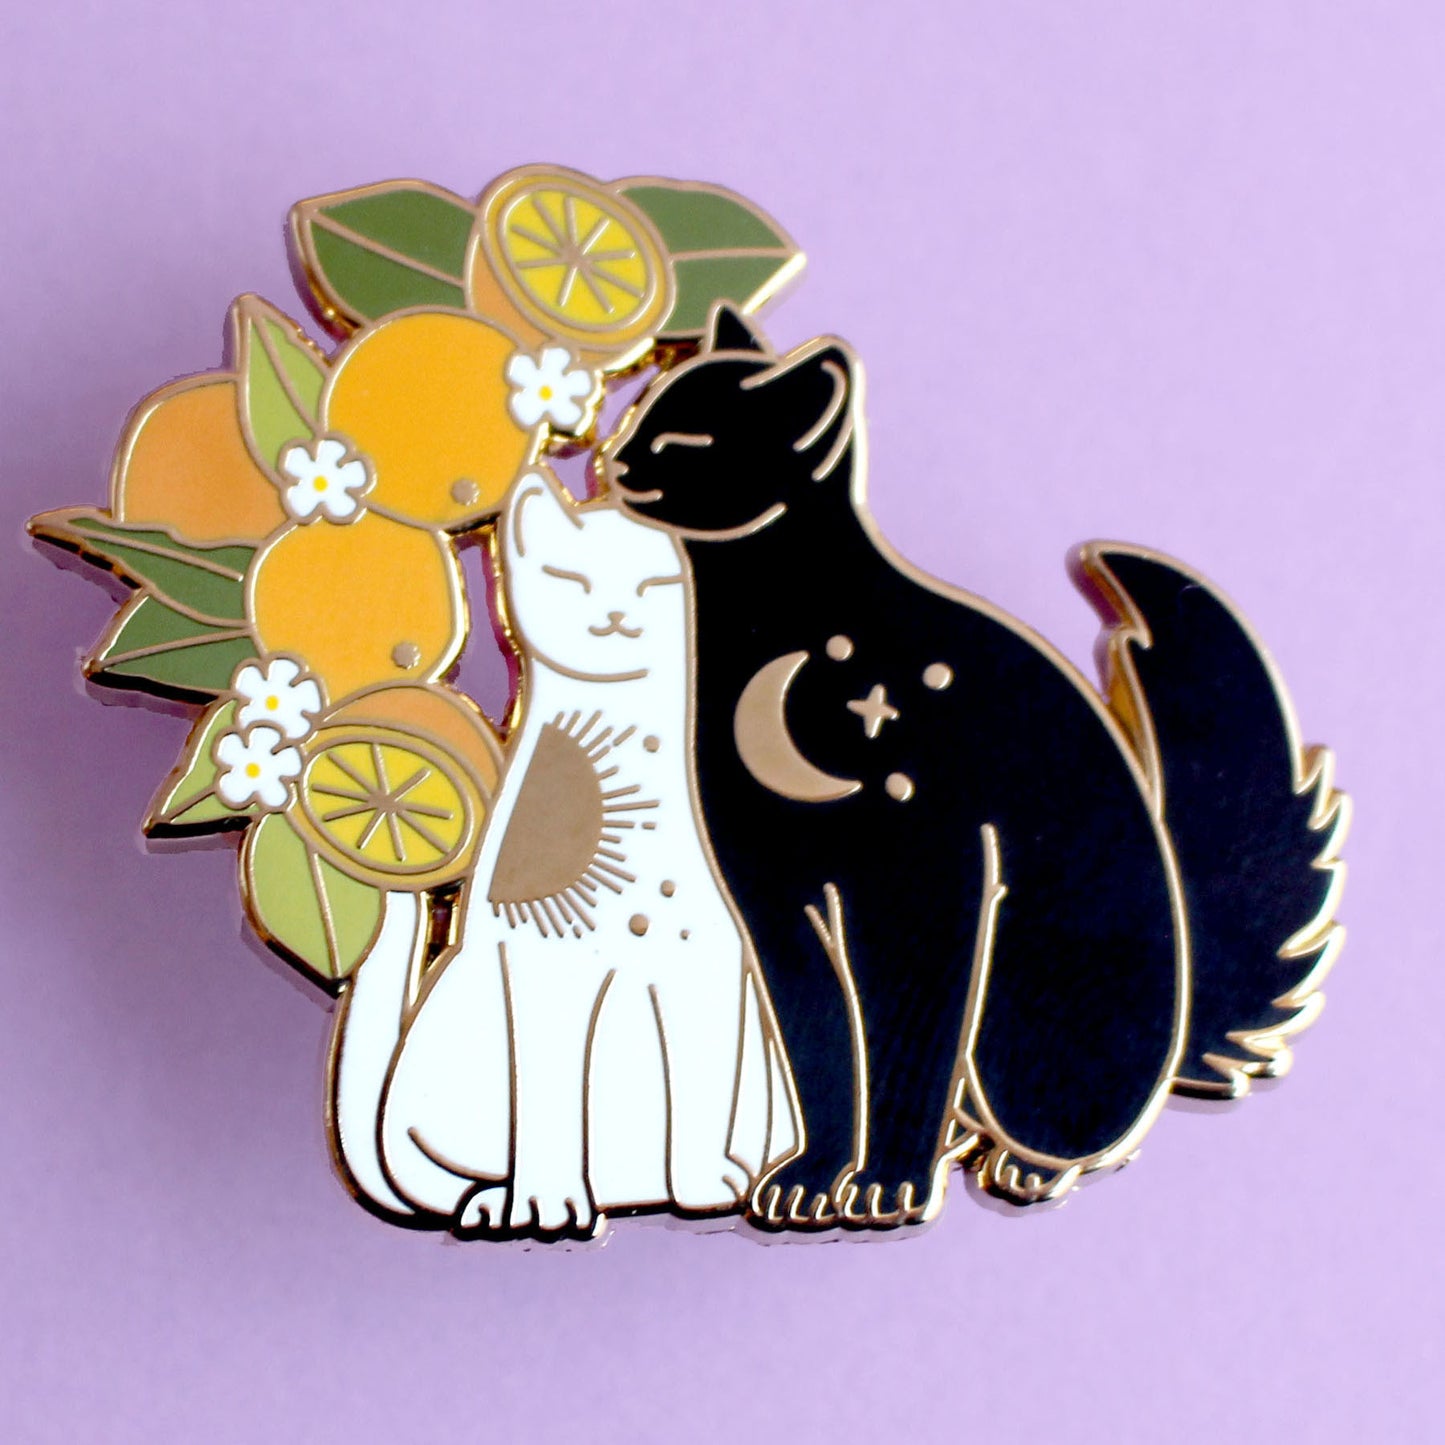 Snuggling cats enamel pin with oranges